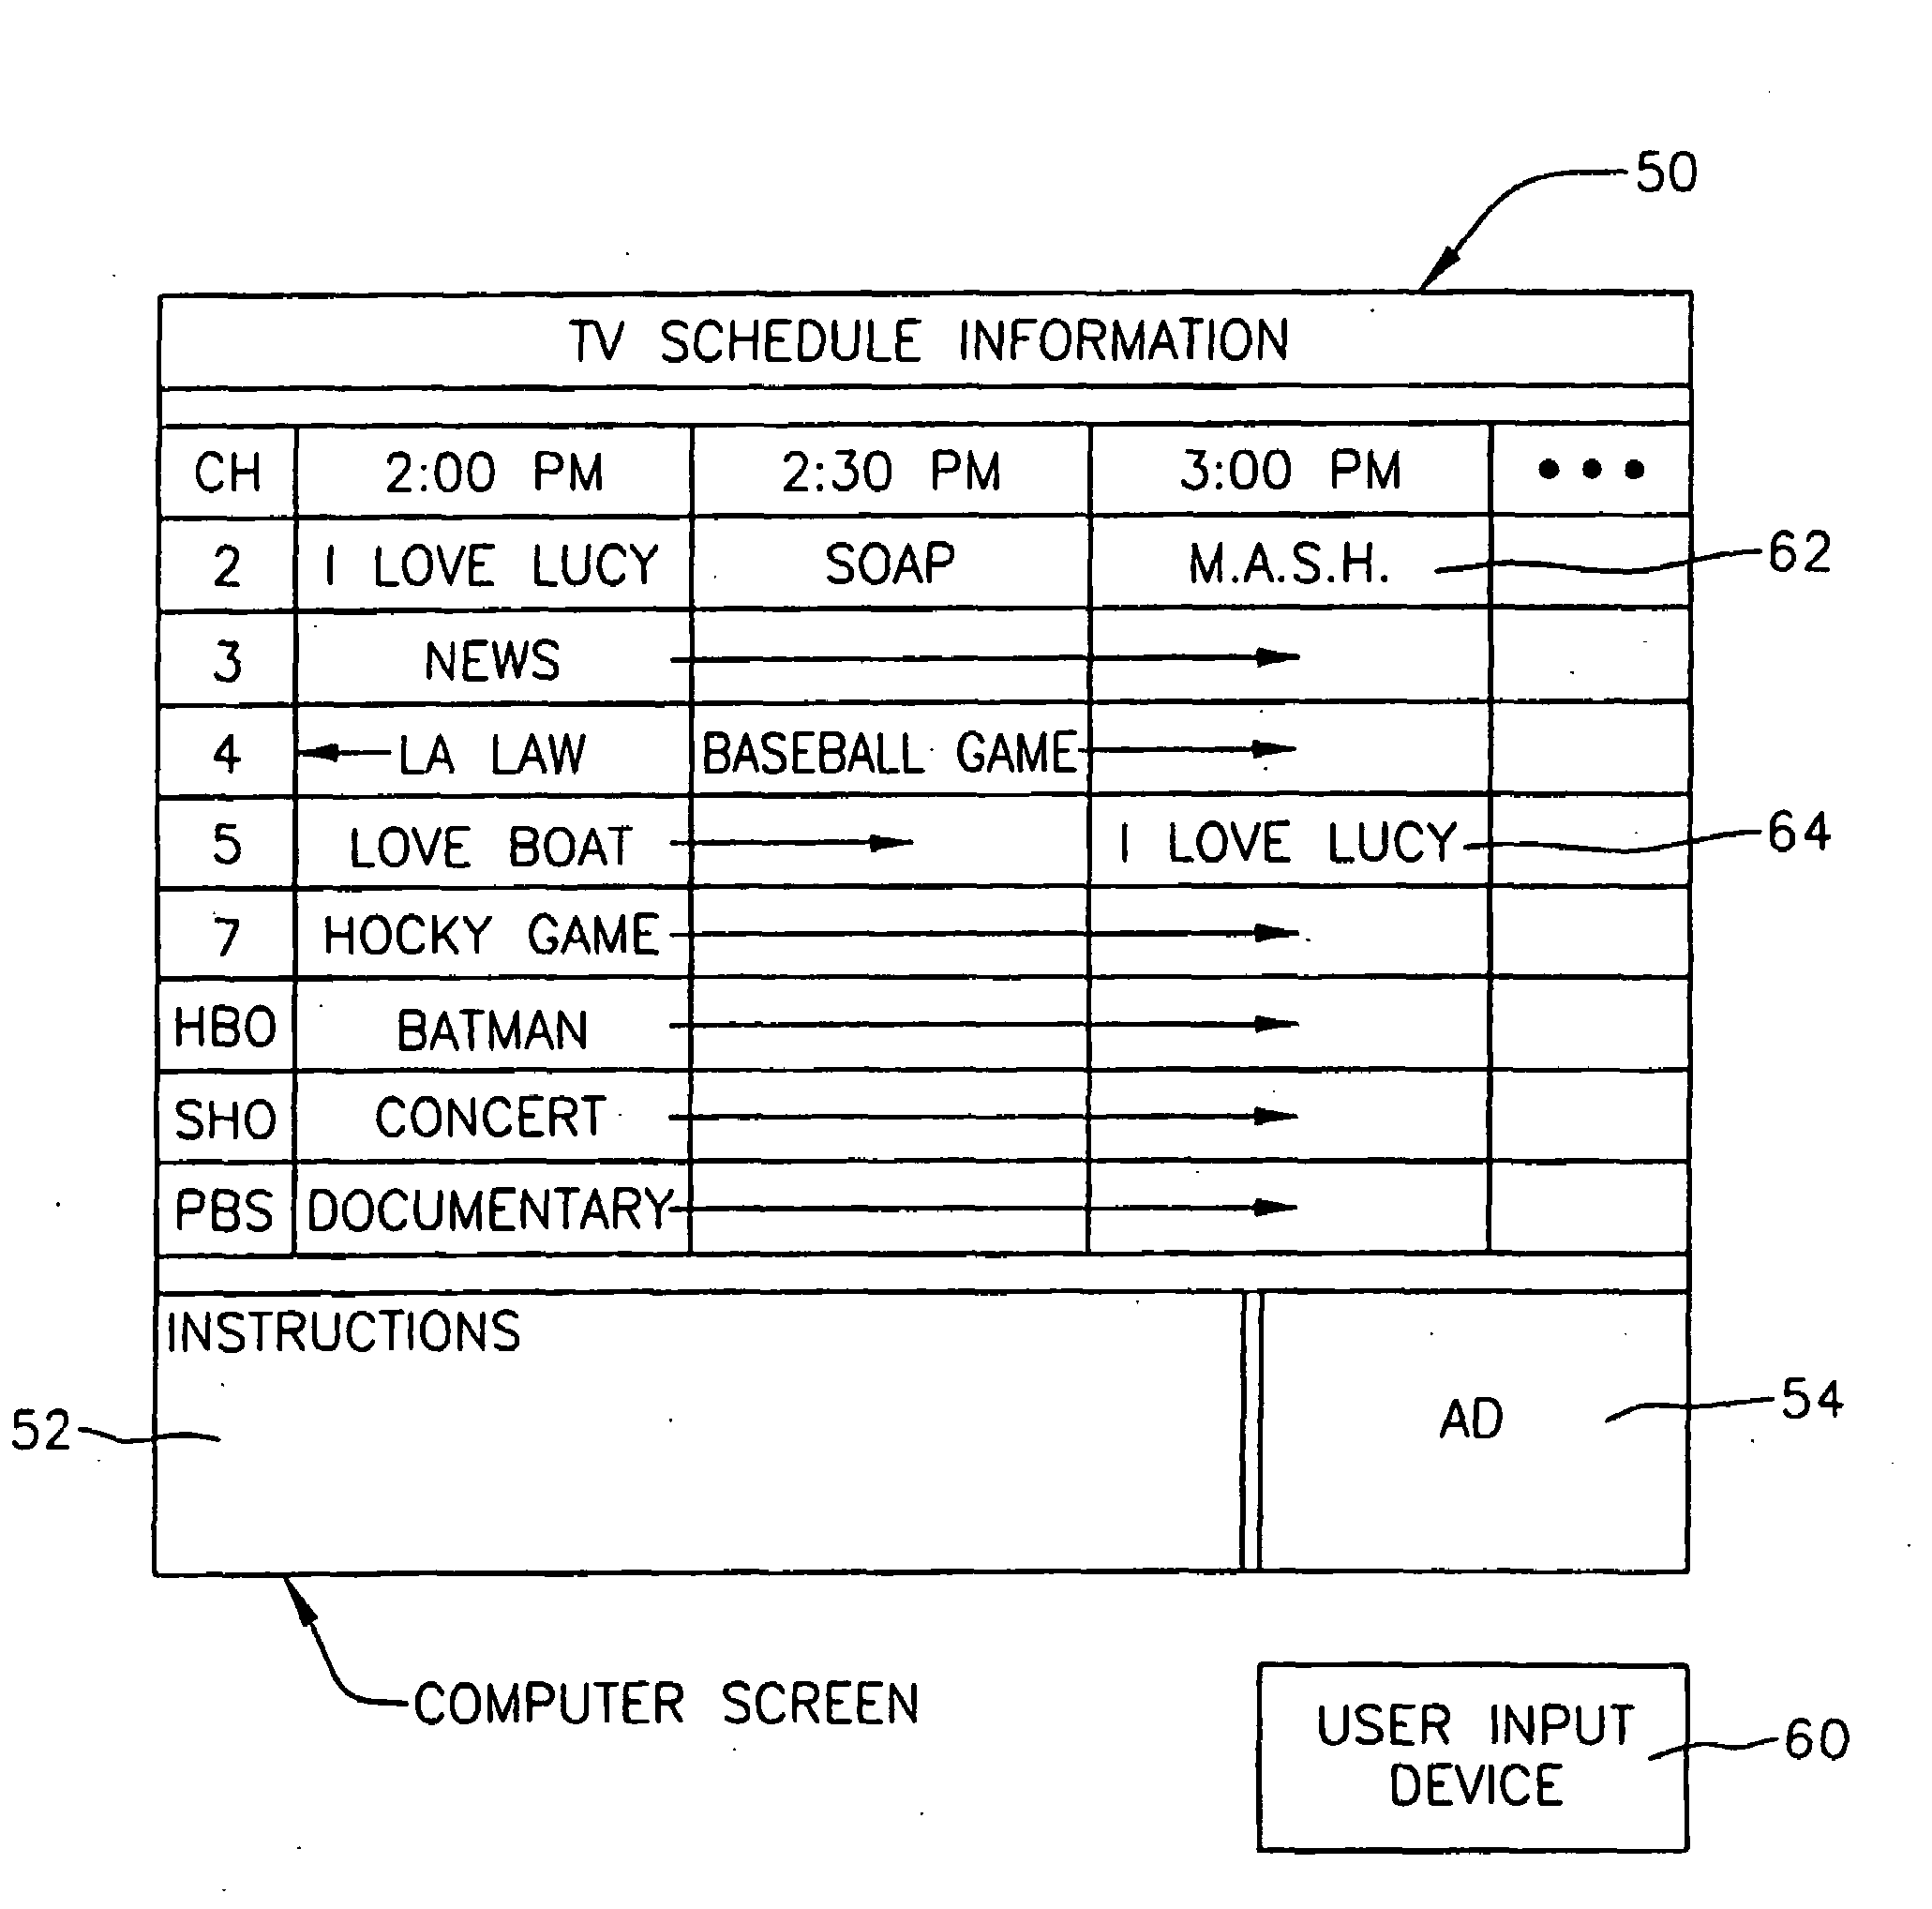 Interactive computer system for providing television schedule information